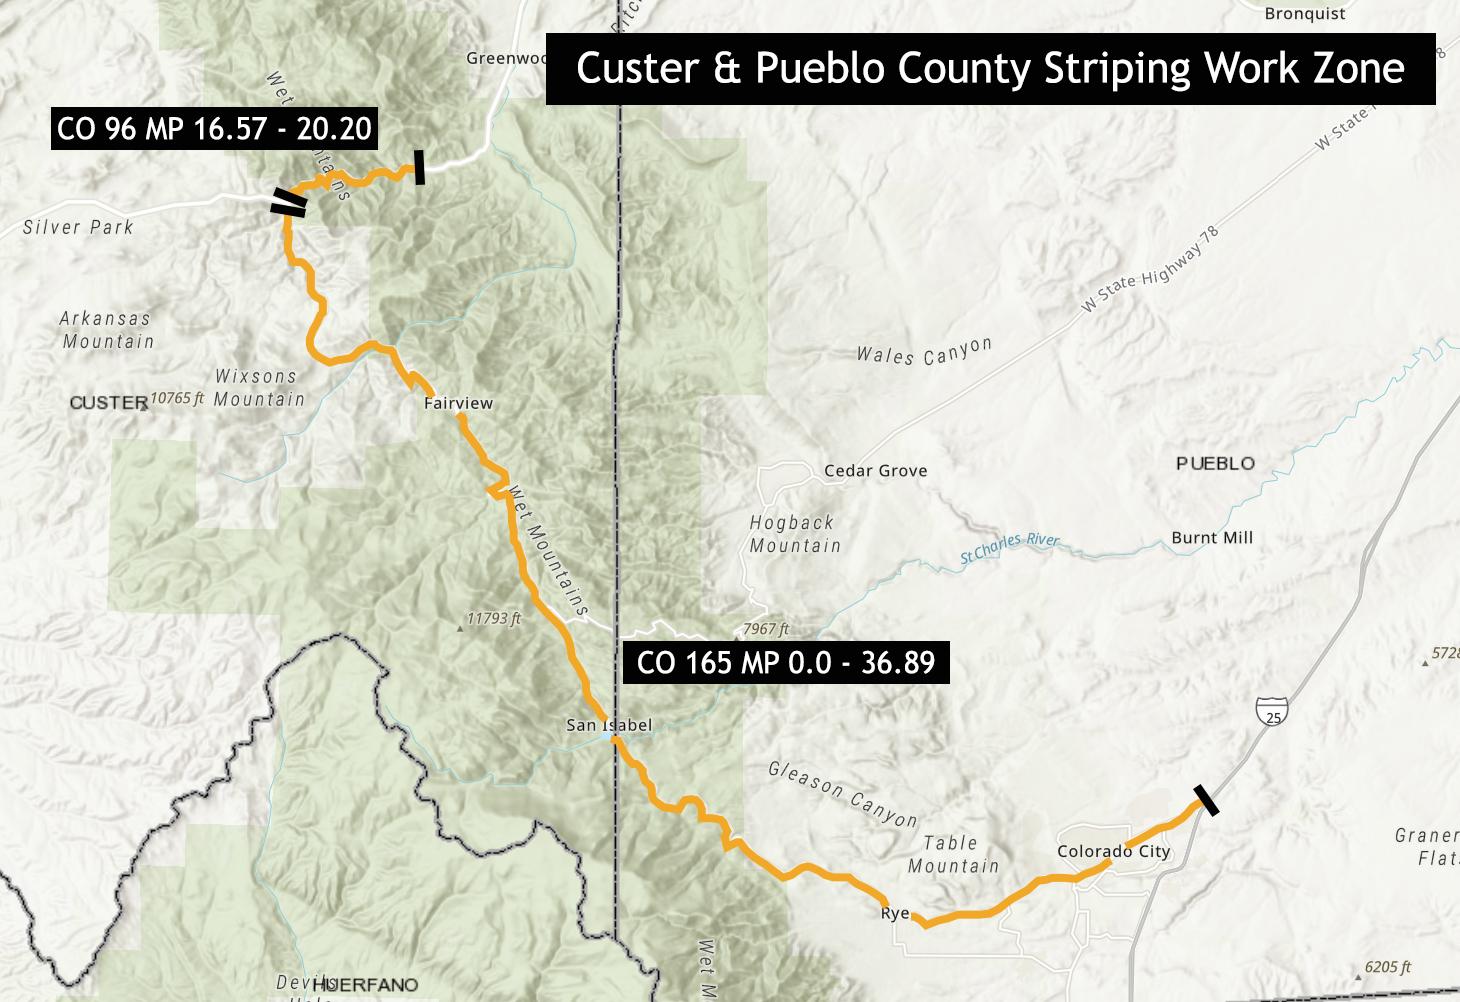 Custer and Pueblo County Striping project map detail image